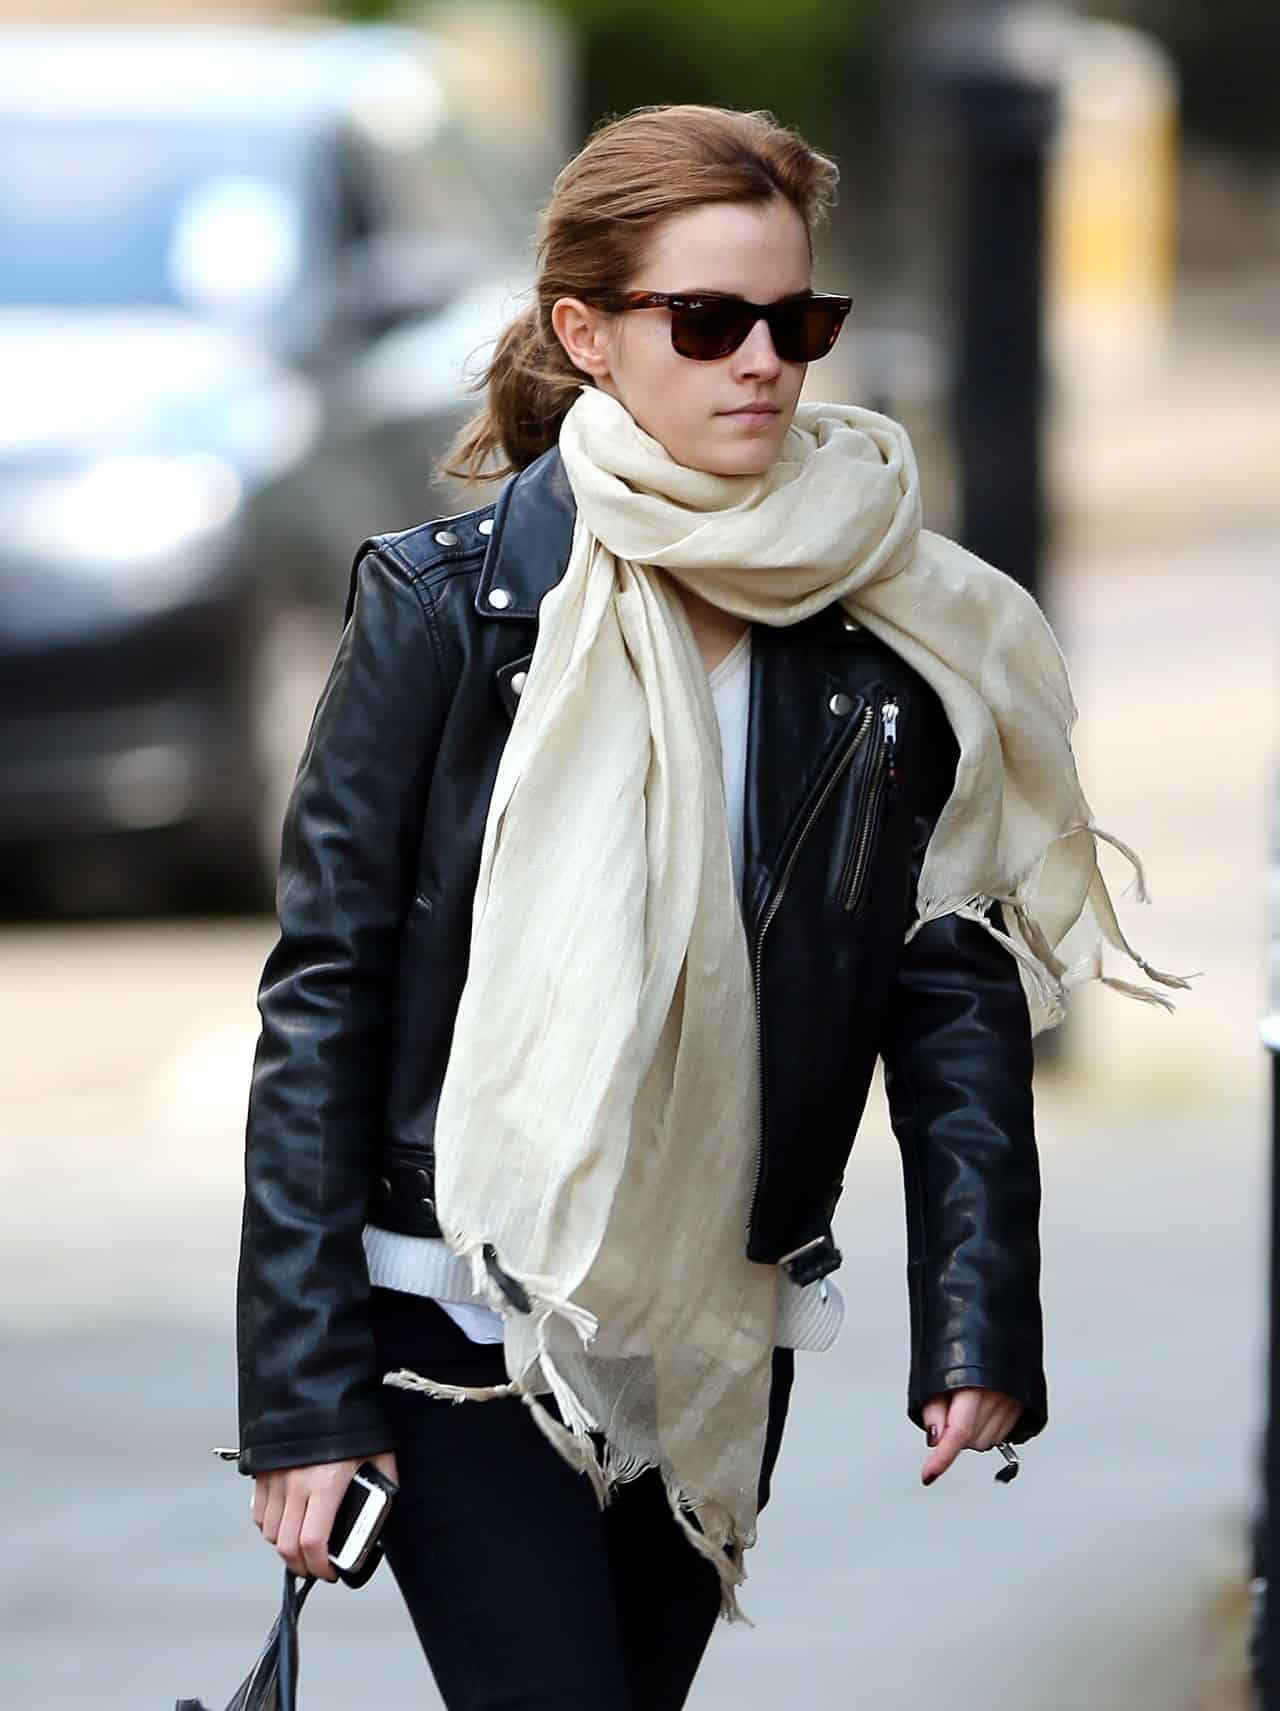 Emma Watson Rocked a Casual but Stylish Look as She Went Shopping in London